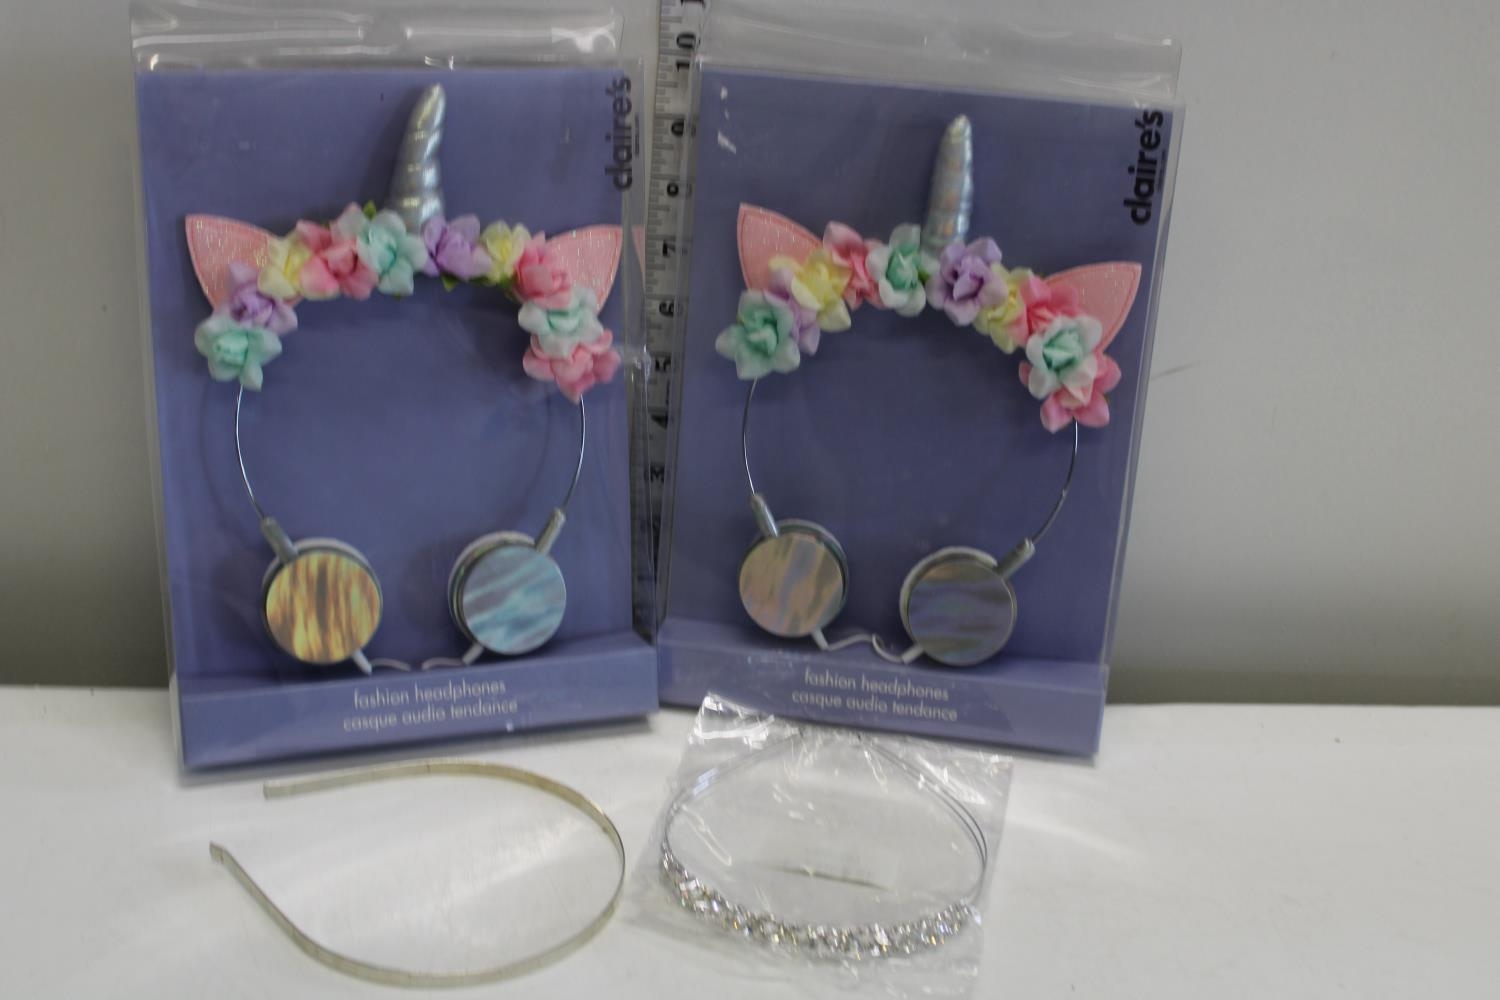 Two Claire's fashion headphone sets